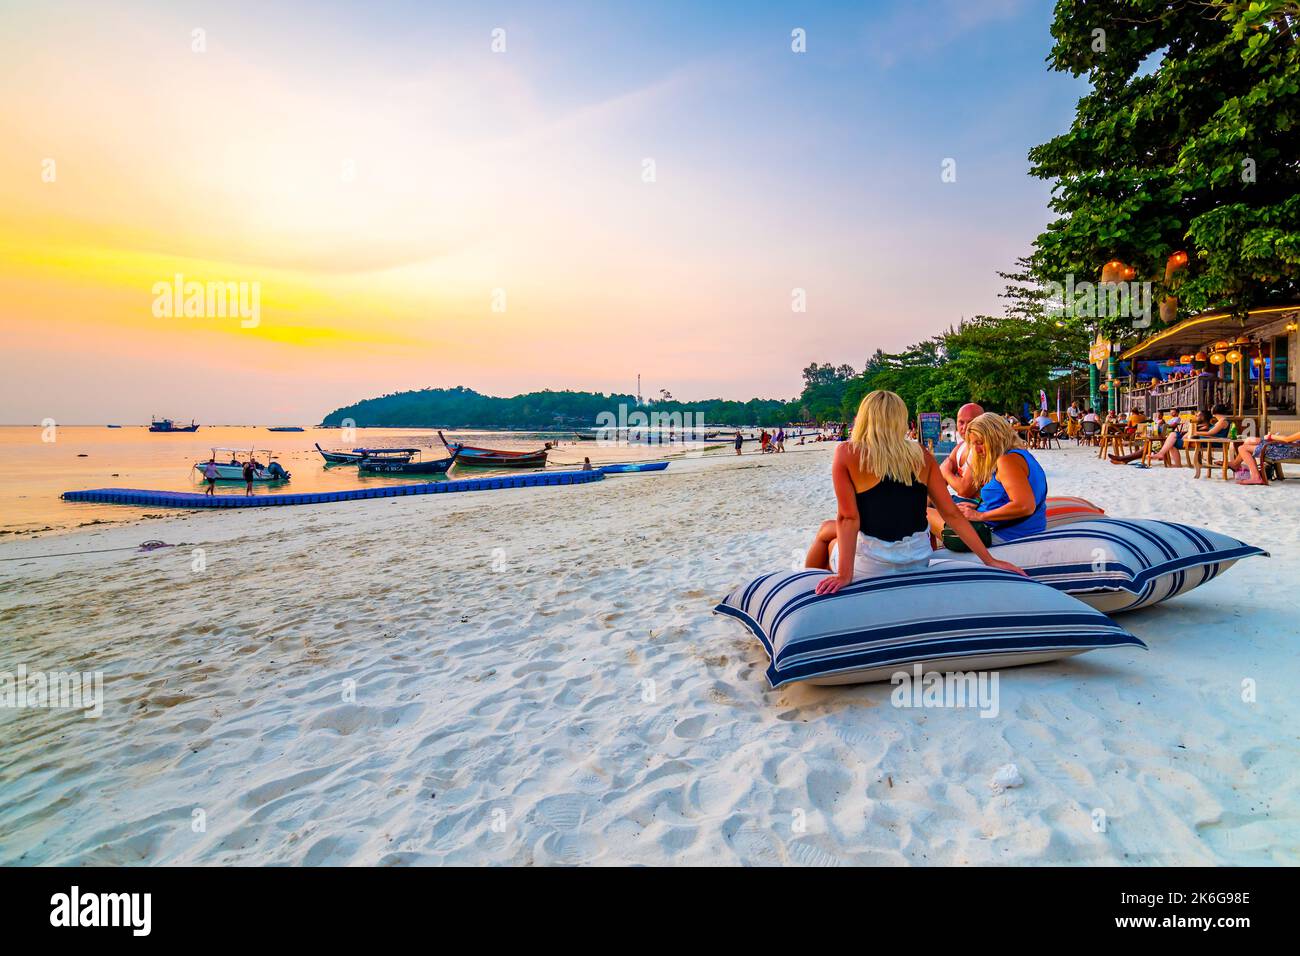 Koh Lipe, Thailand - 13.11.2019: Tourist are sitting on big pillows at Ko Lipe restaurant. Beach relaxation on pillows with summer drinks. Sunset in b Stock Photo